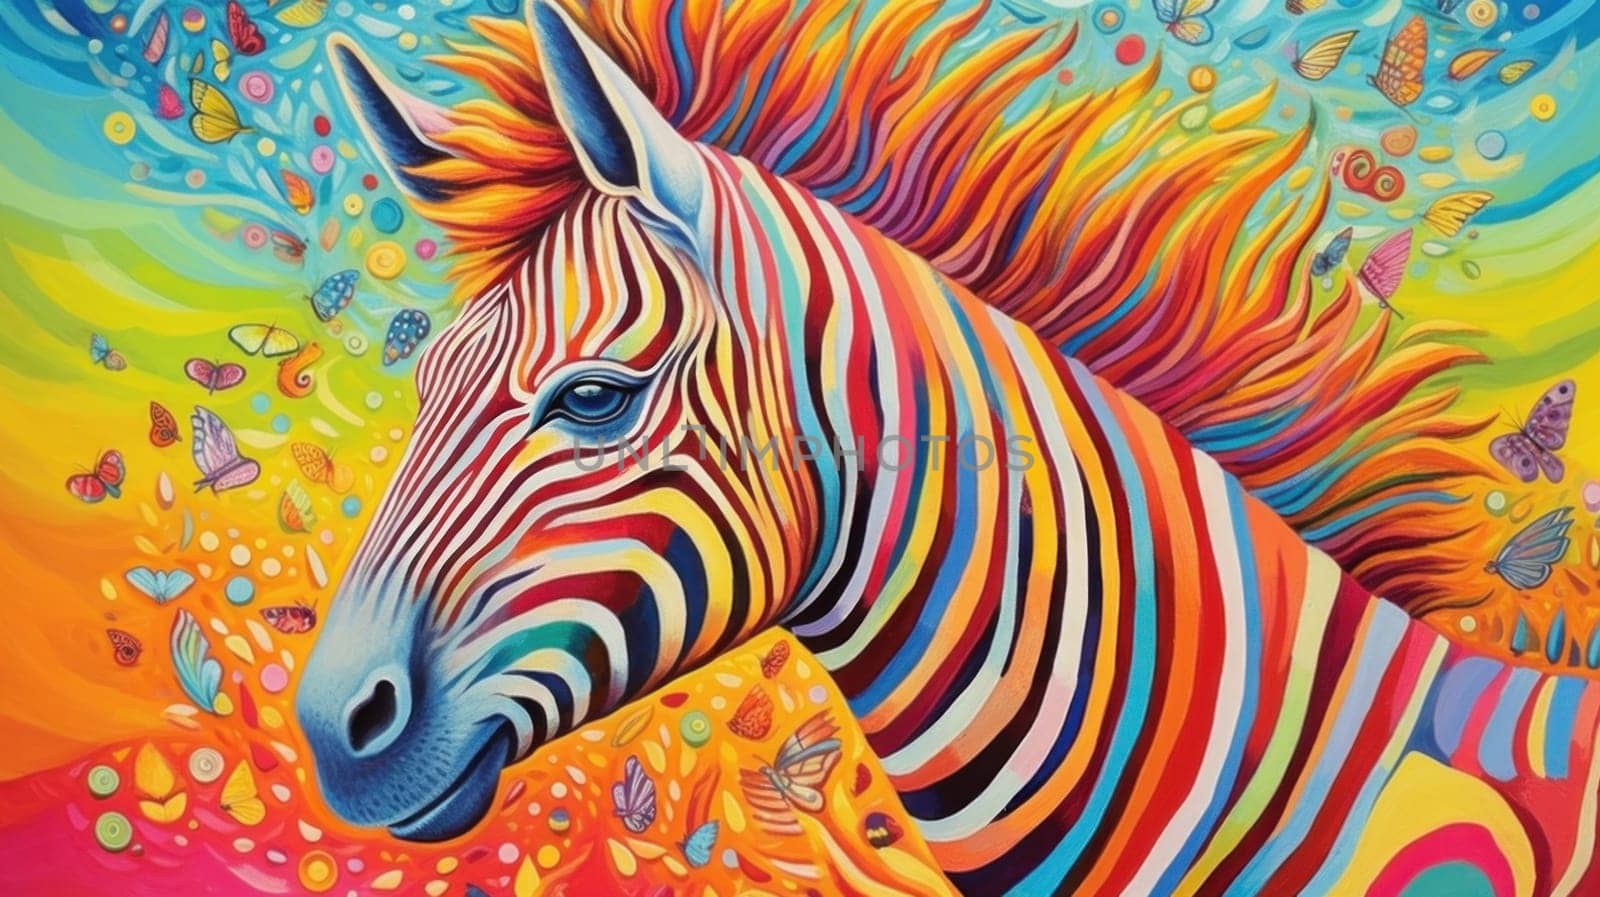 A painting of a zebra with a colorful background